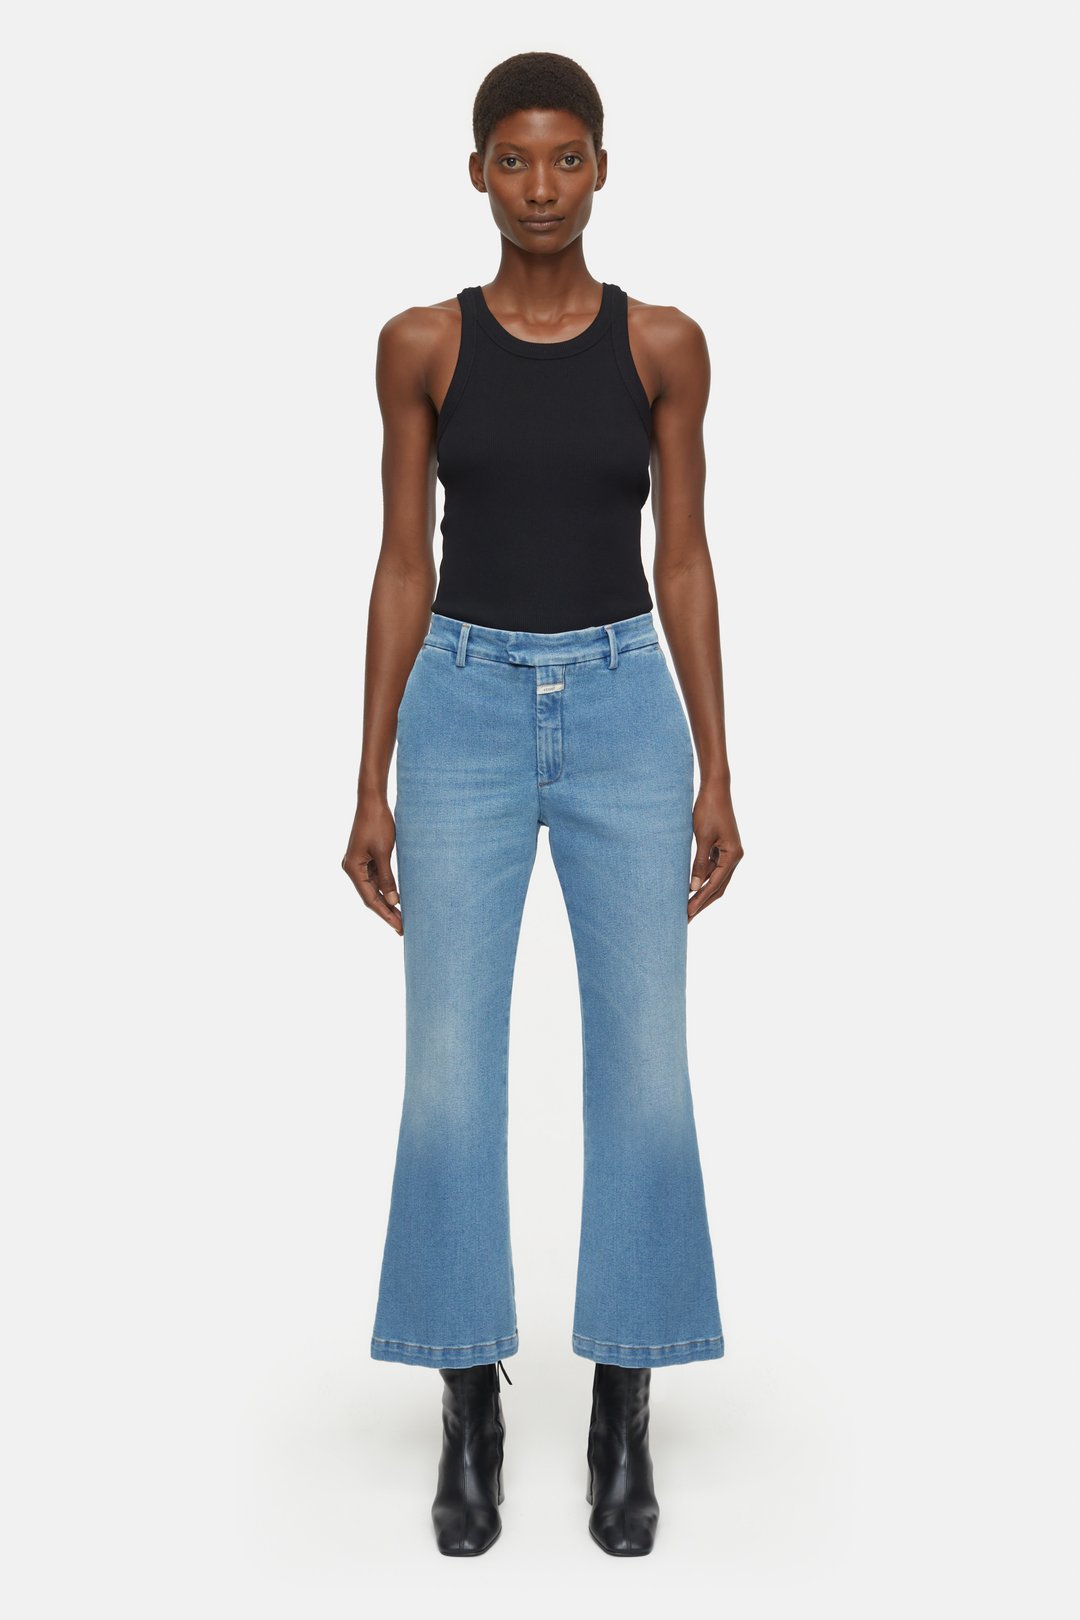 STYLE WHARTON RELAXED - NAME JEANS CLOSED |